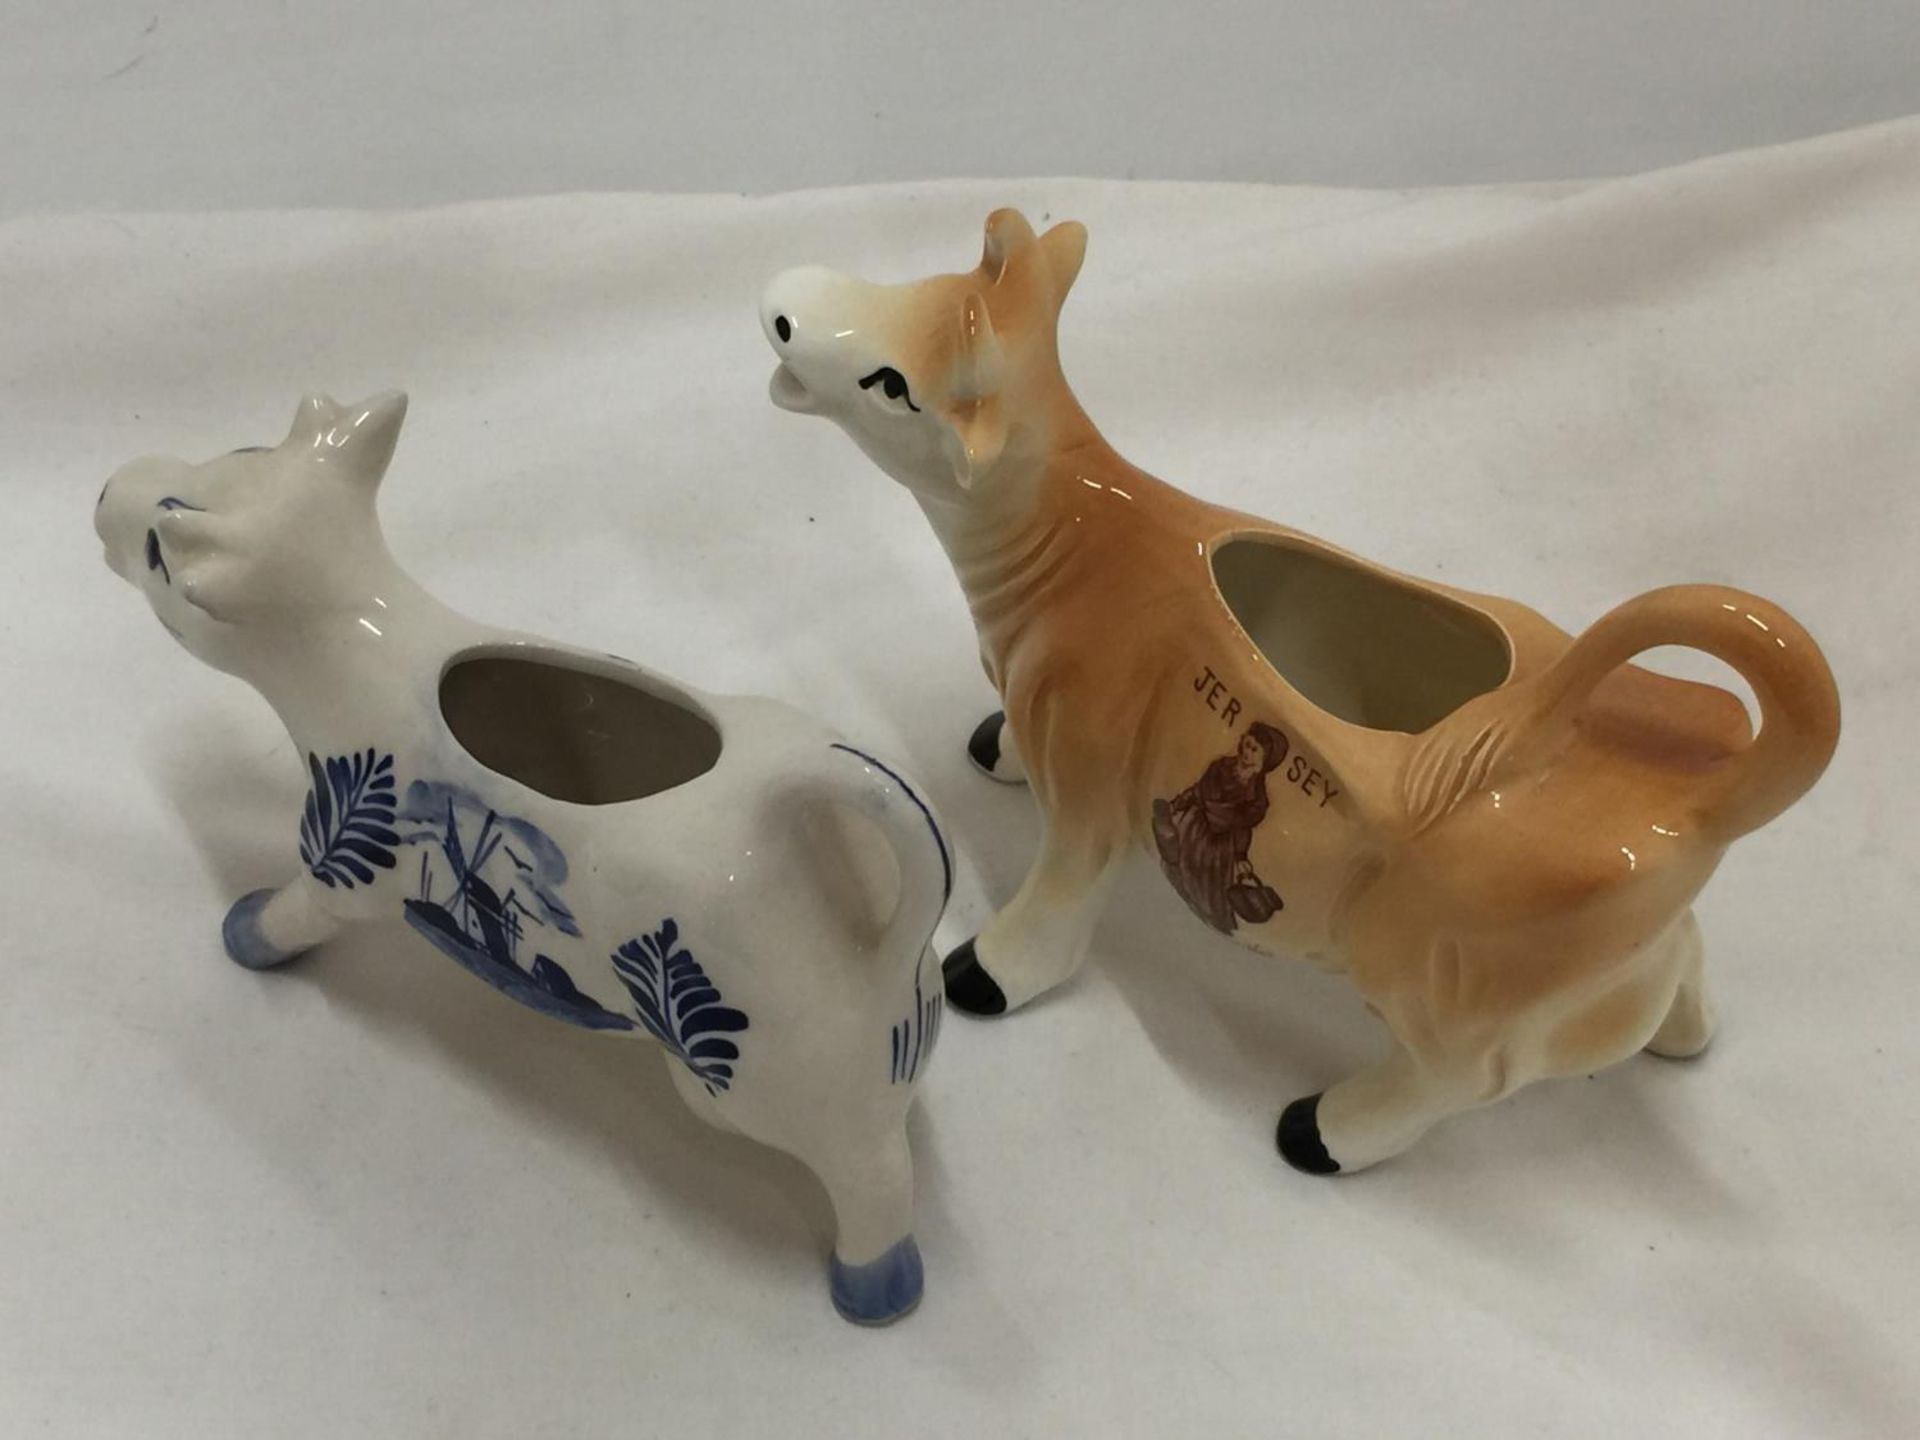 A DELFT BLUE HANDPAINTED COW CREAMER AND A JERSEY COW CREAMER - Image 4 of 7